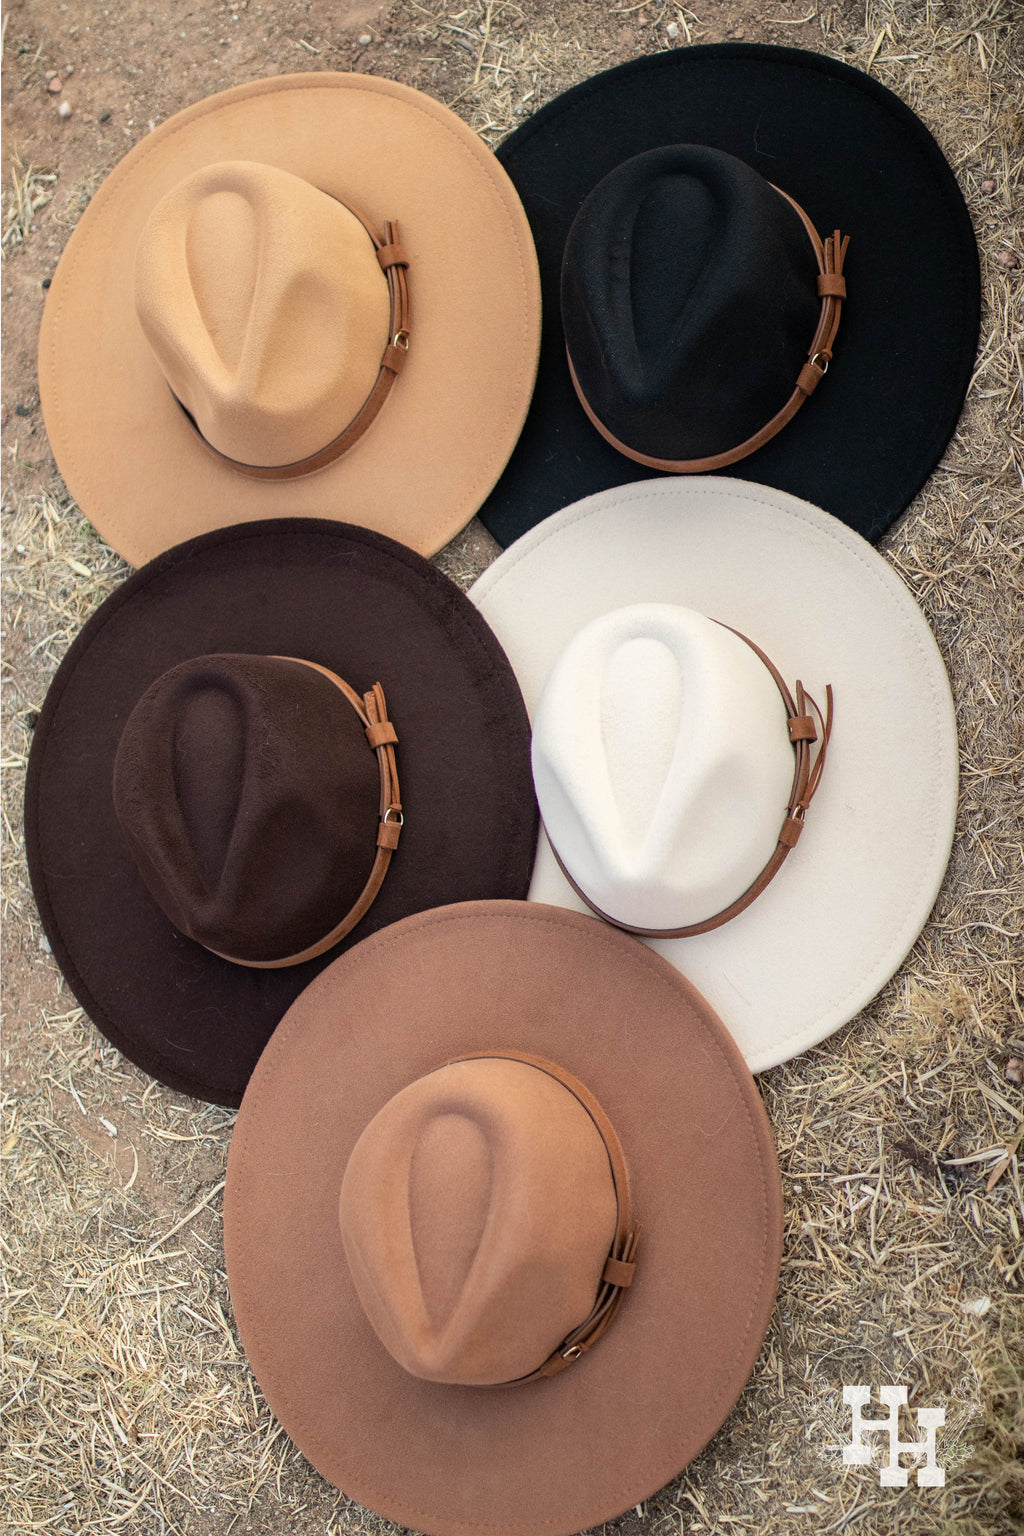 5 different colored wide brim hats with brown leather strap around each one. Top left hat is light kahki, top right hat is black, middle left hat is dark brown, middle right hat is cream, and bottom is dark kahki. 